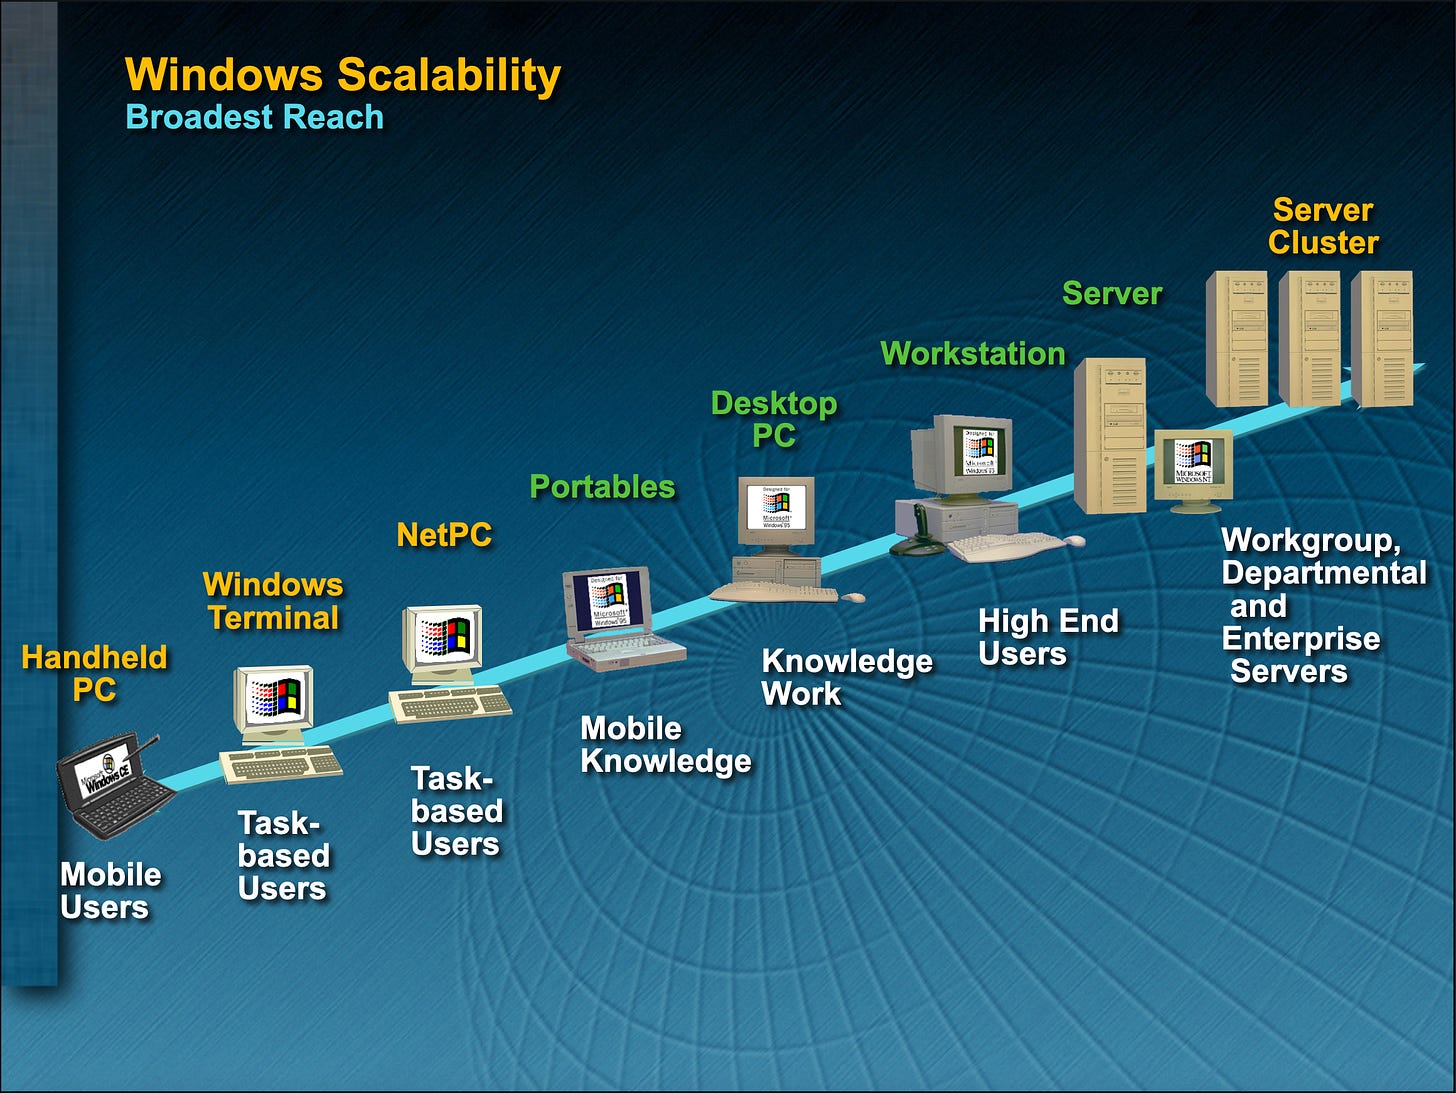 Windows Scalability slide. Showing form factors running windows starting with a handheld pc, windows terminal, netwpc portables, desktops, workstations, servers. they are positioned on an arrow going up and to the right signifying more power and capability.